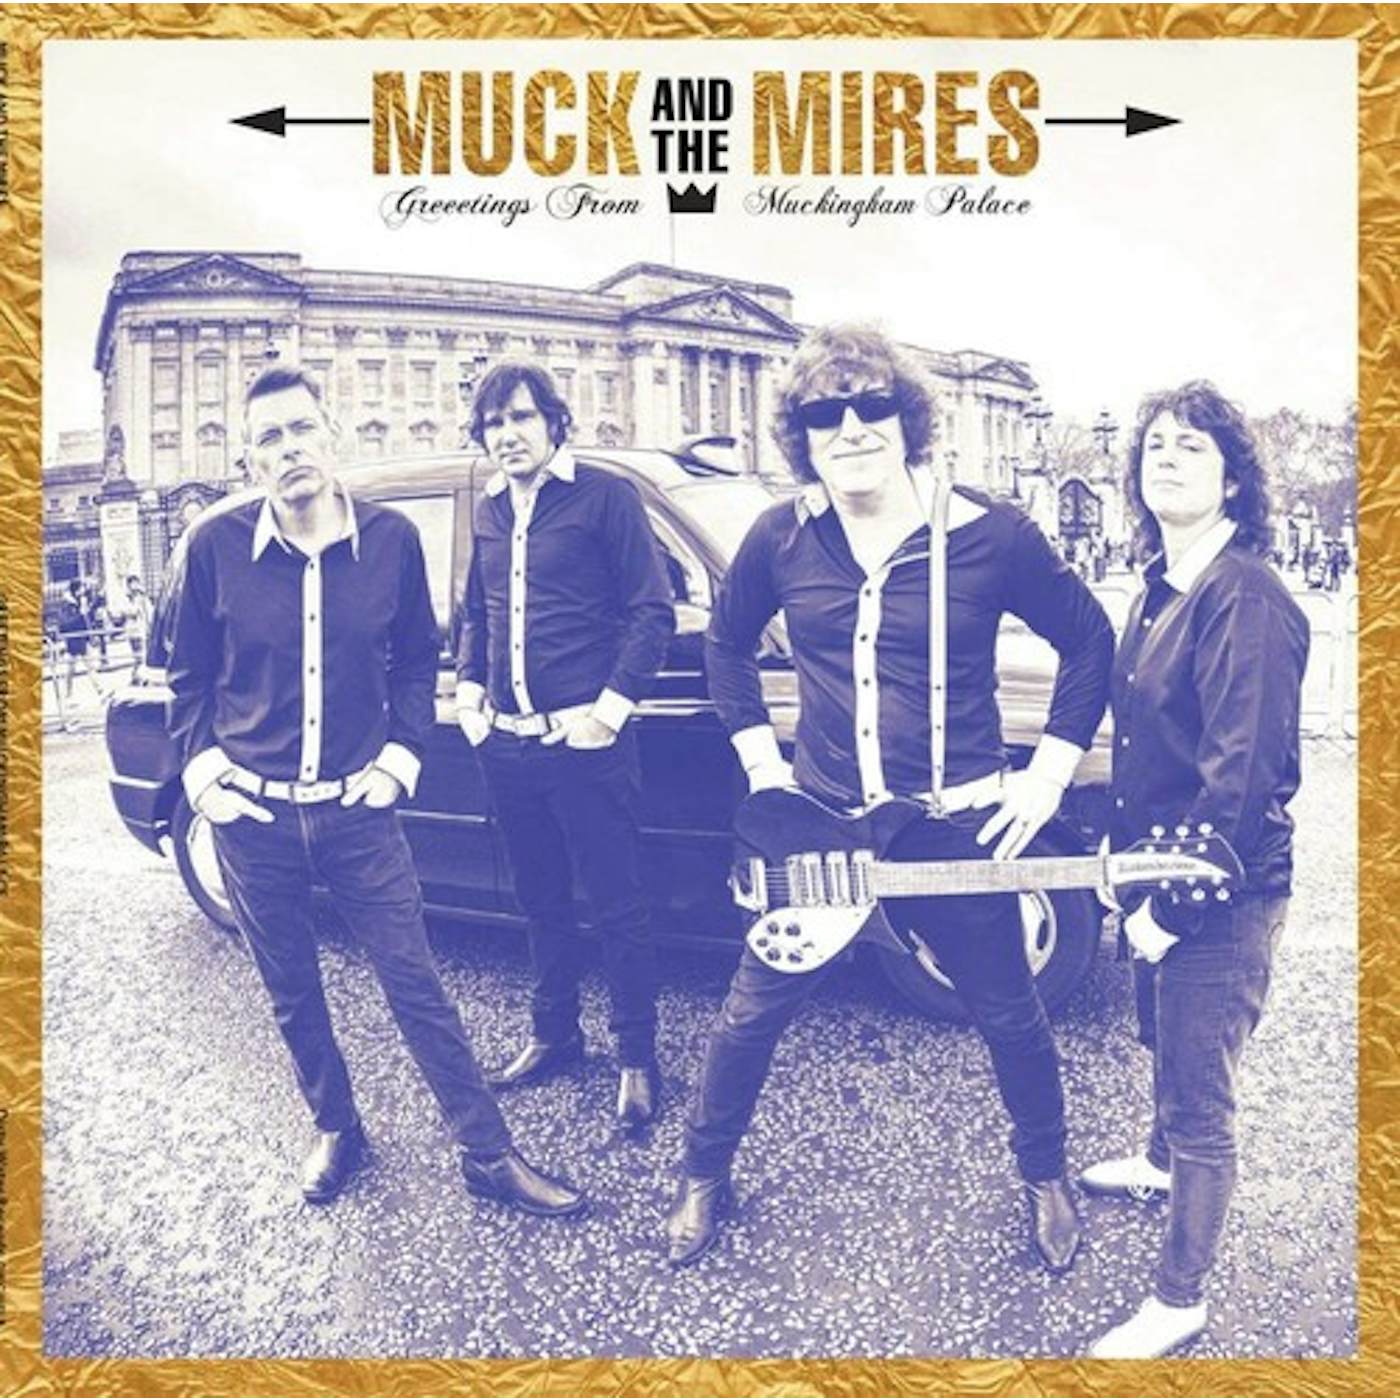 Muck & The Mires GREETINGS FROM MUCKINGHAM PALACE CD